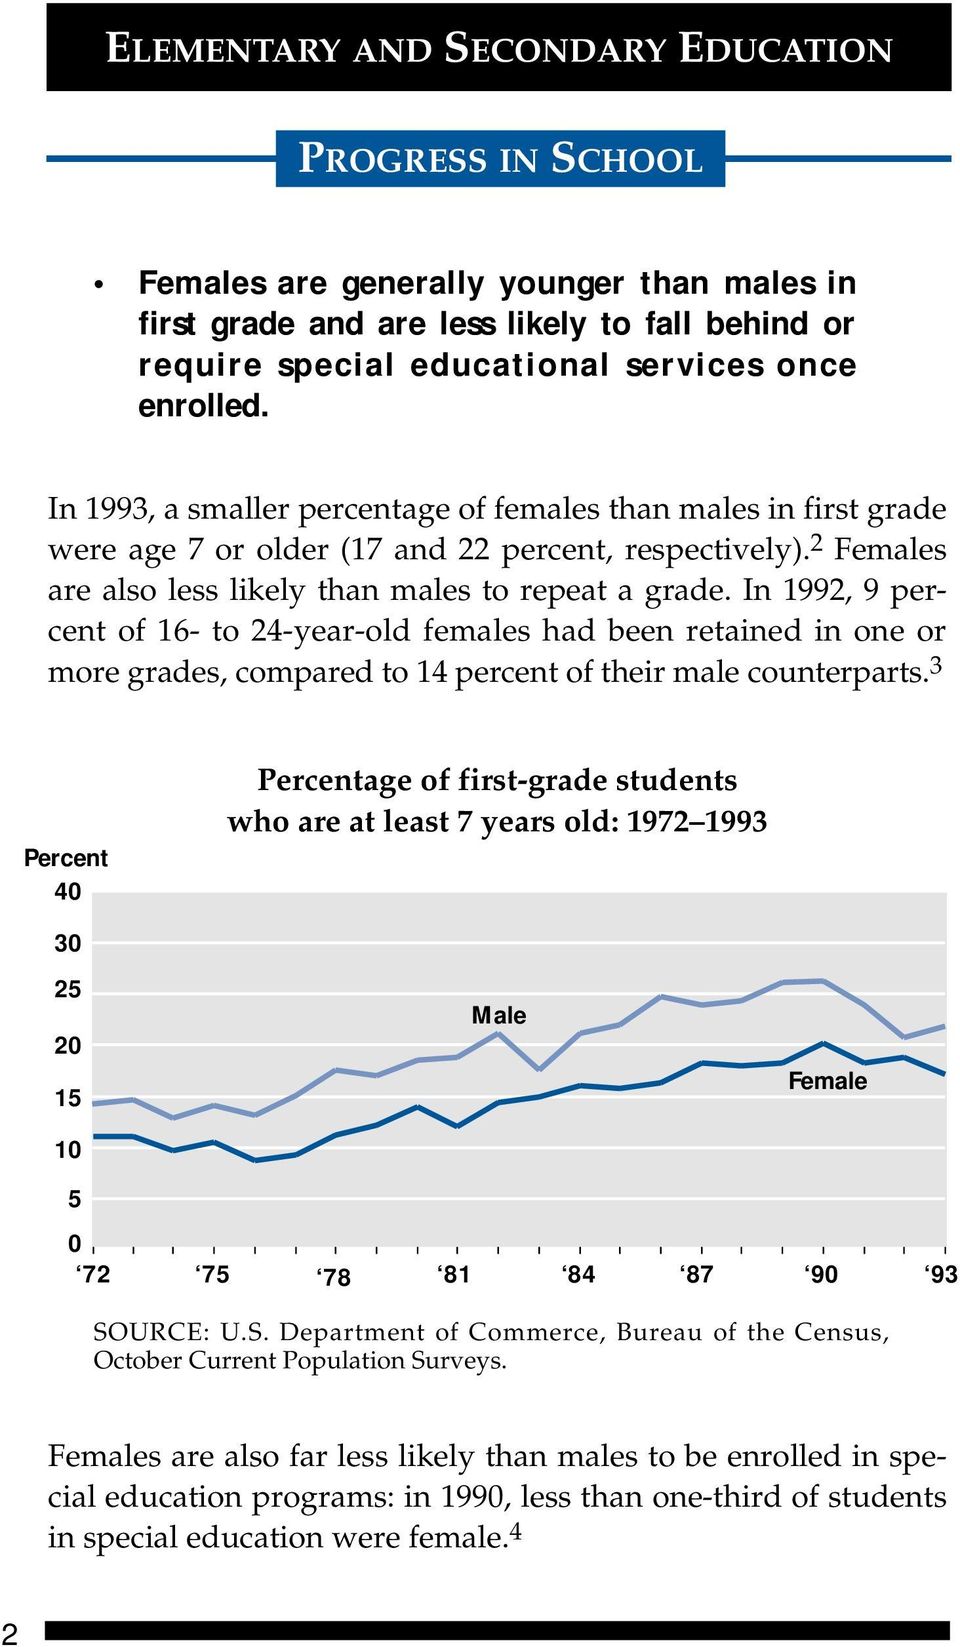 In 1992, 9 percent of 16- to 24-year-old females had been retained in one or more grades, compared to 14 percent of their male counterparts.